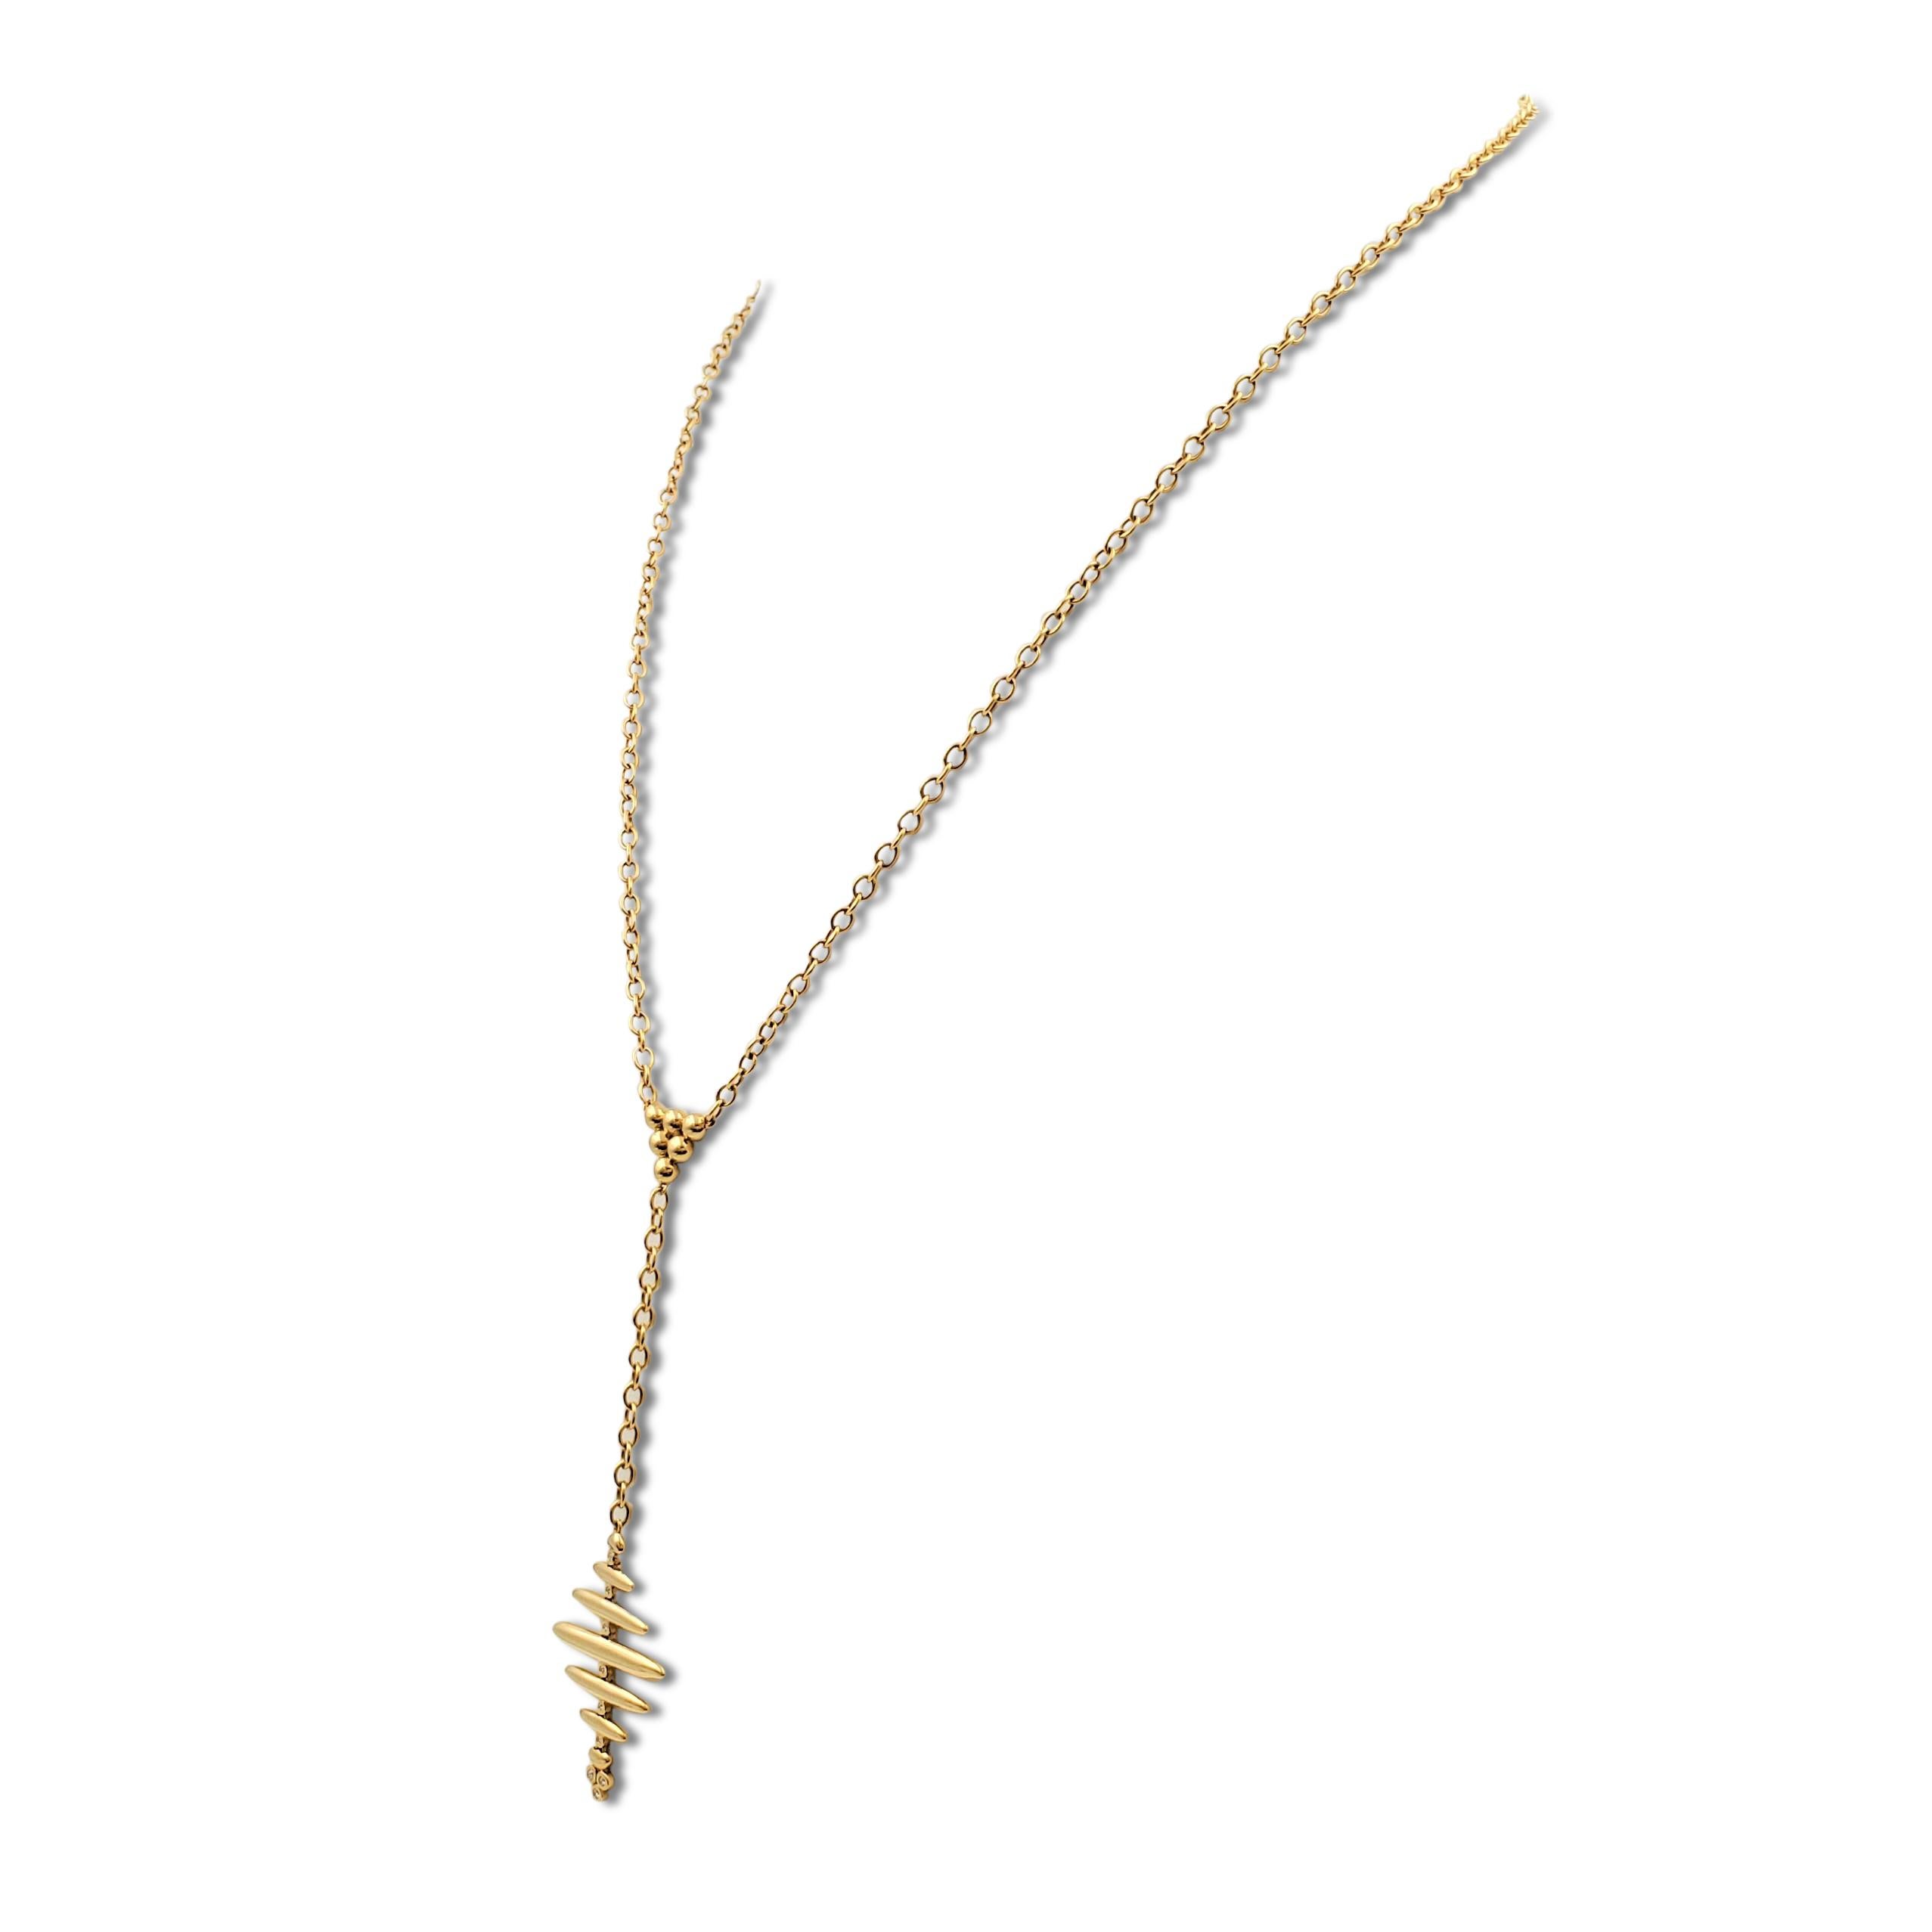 Authentic Temple St. Clair 'Honeycomb' necklace crafted in 18 karat yellow gold comprised of interlocking circular link chain that is completed by a dangling pendant which centers on moving gold bars and bezel-set round brilliant cut diamond